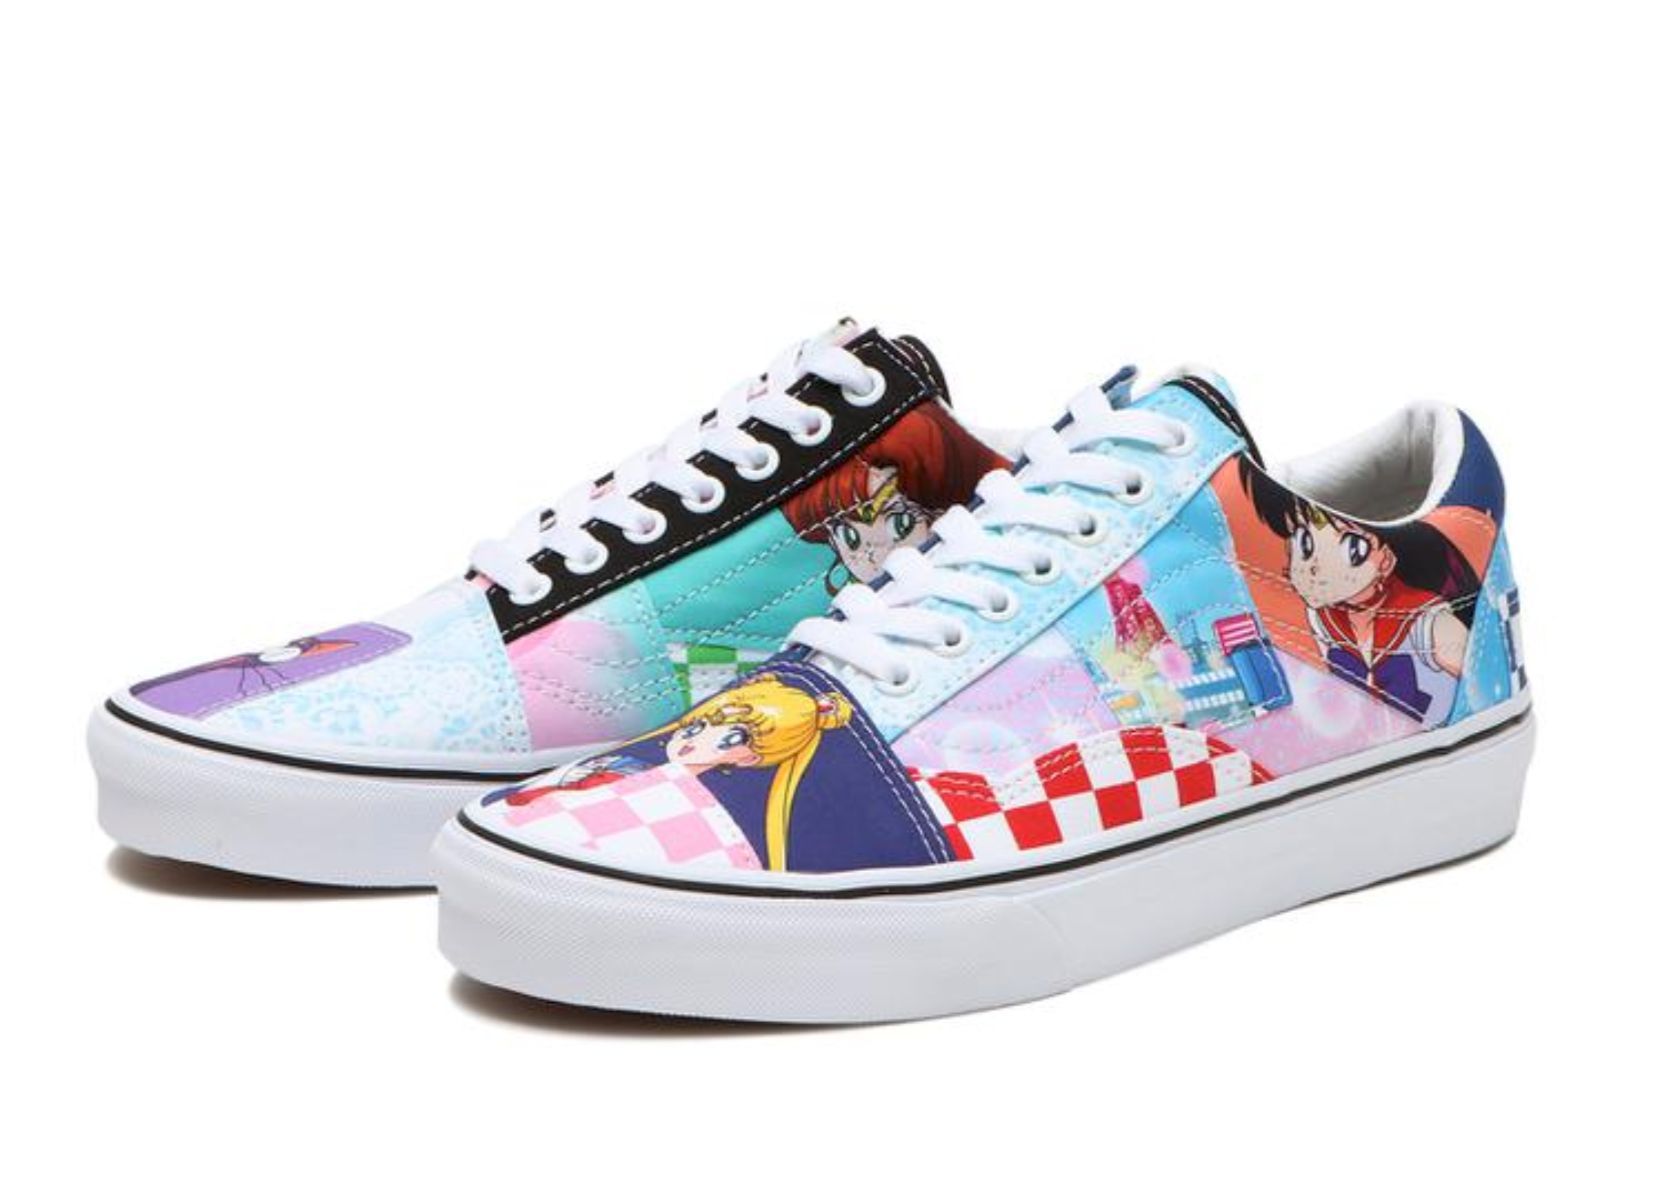 Vans is releasing a retro cool Sailor Moon footwear collection